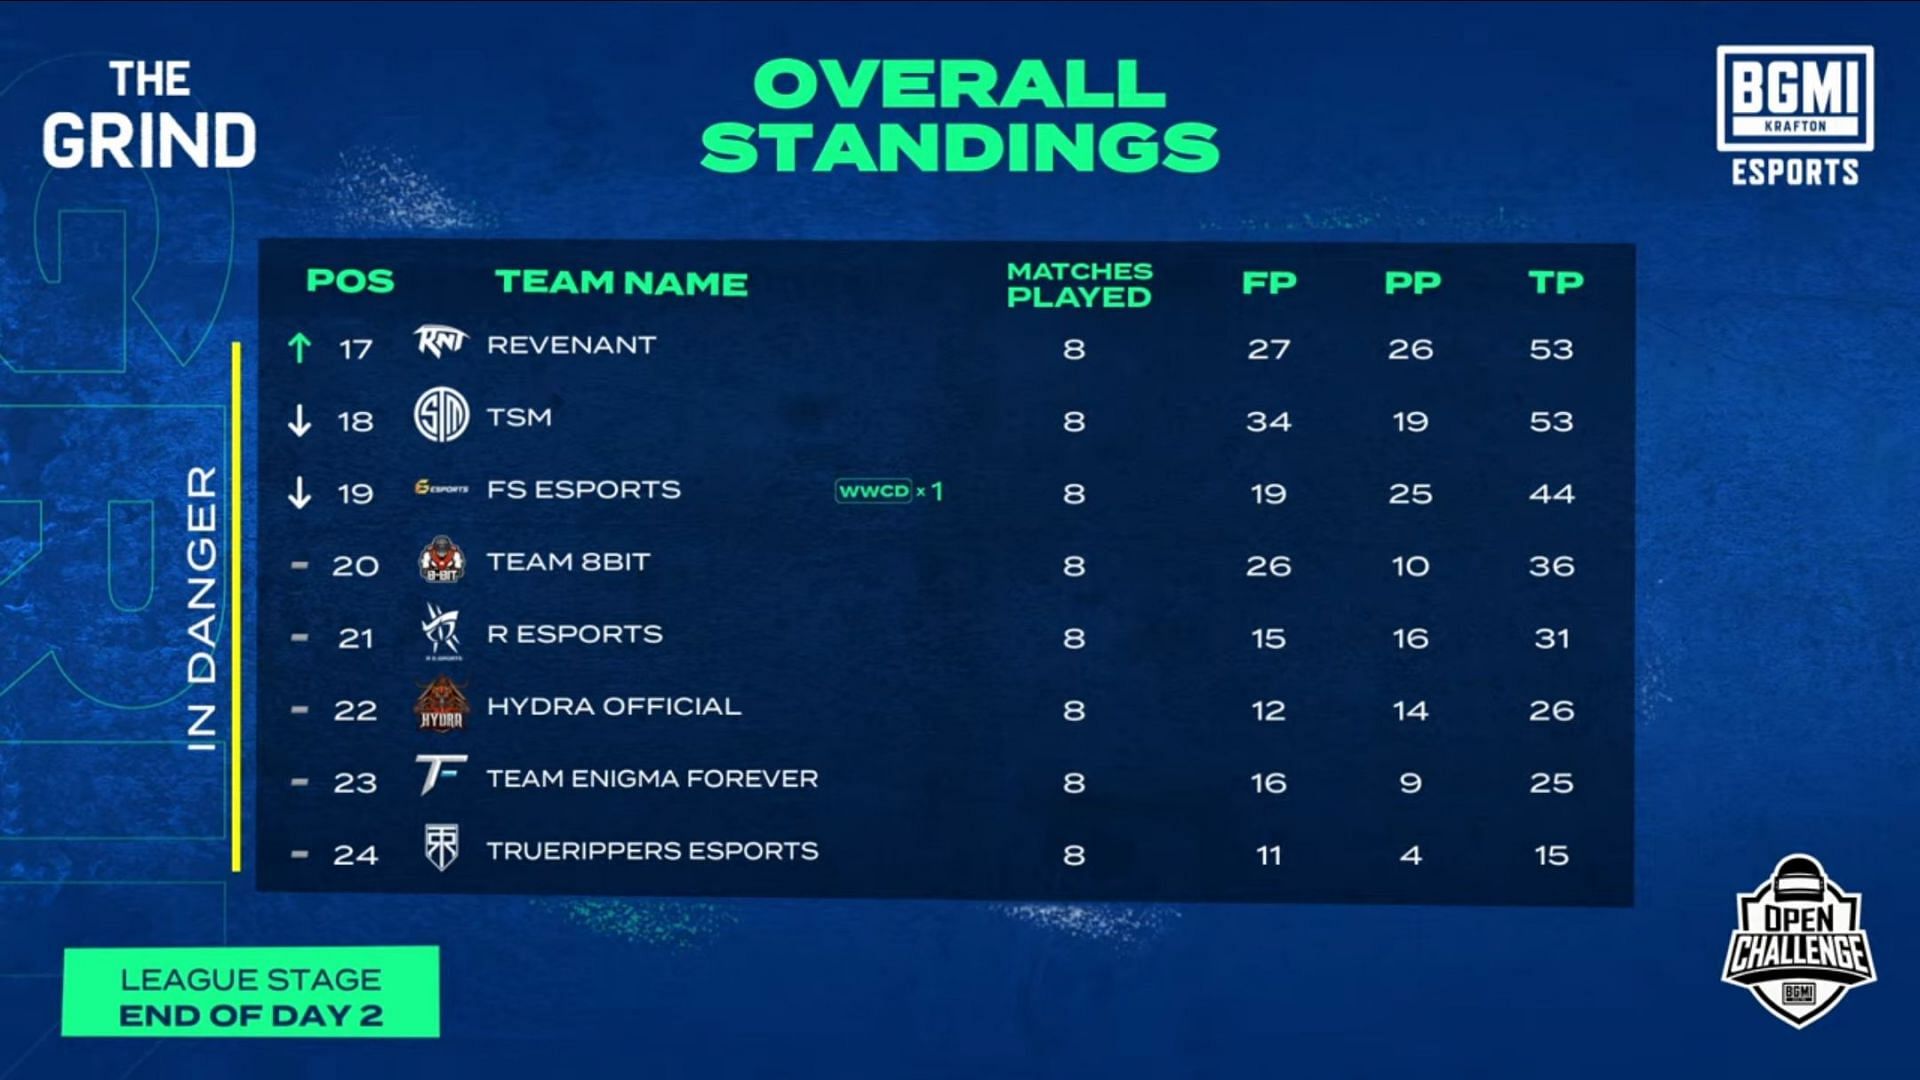 Overall standings of BMOC The Grind League Stage after day 2 (Image via BGMI)